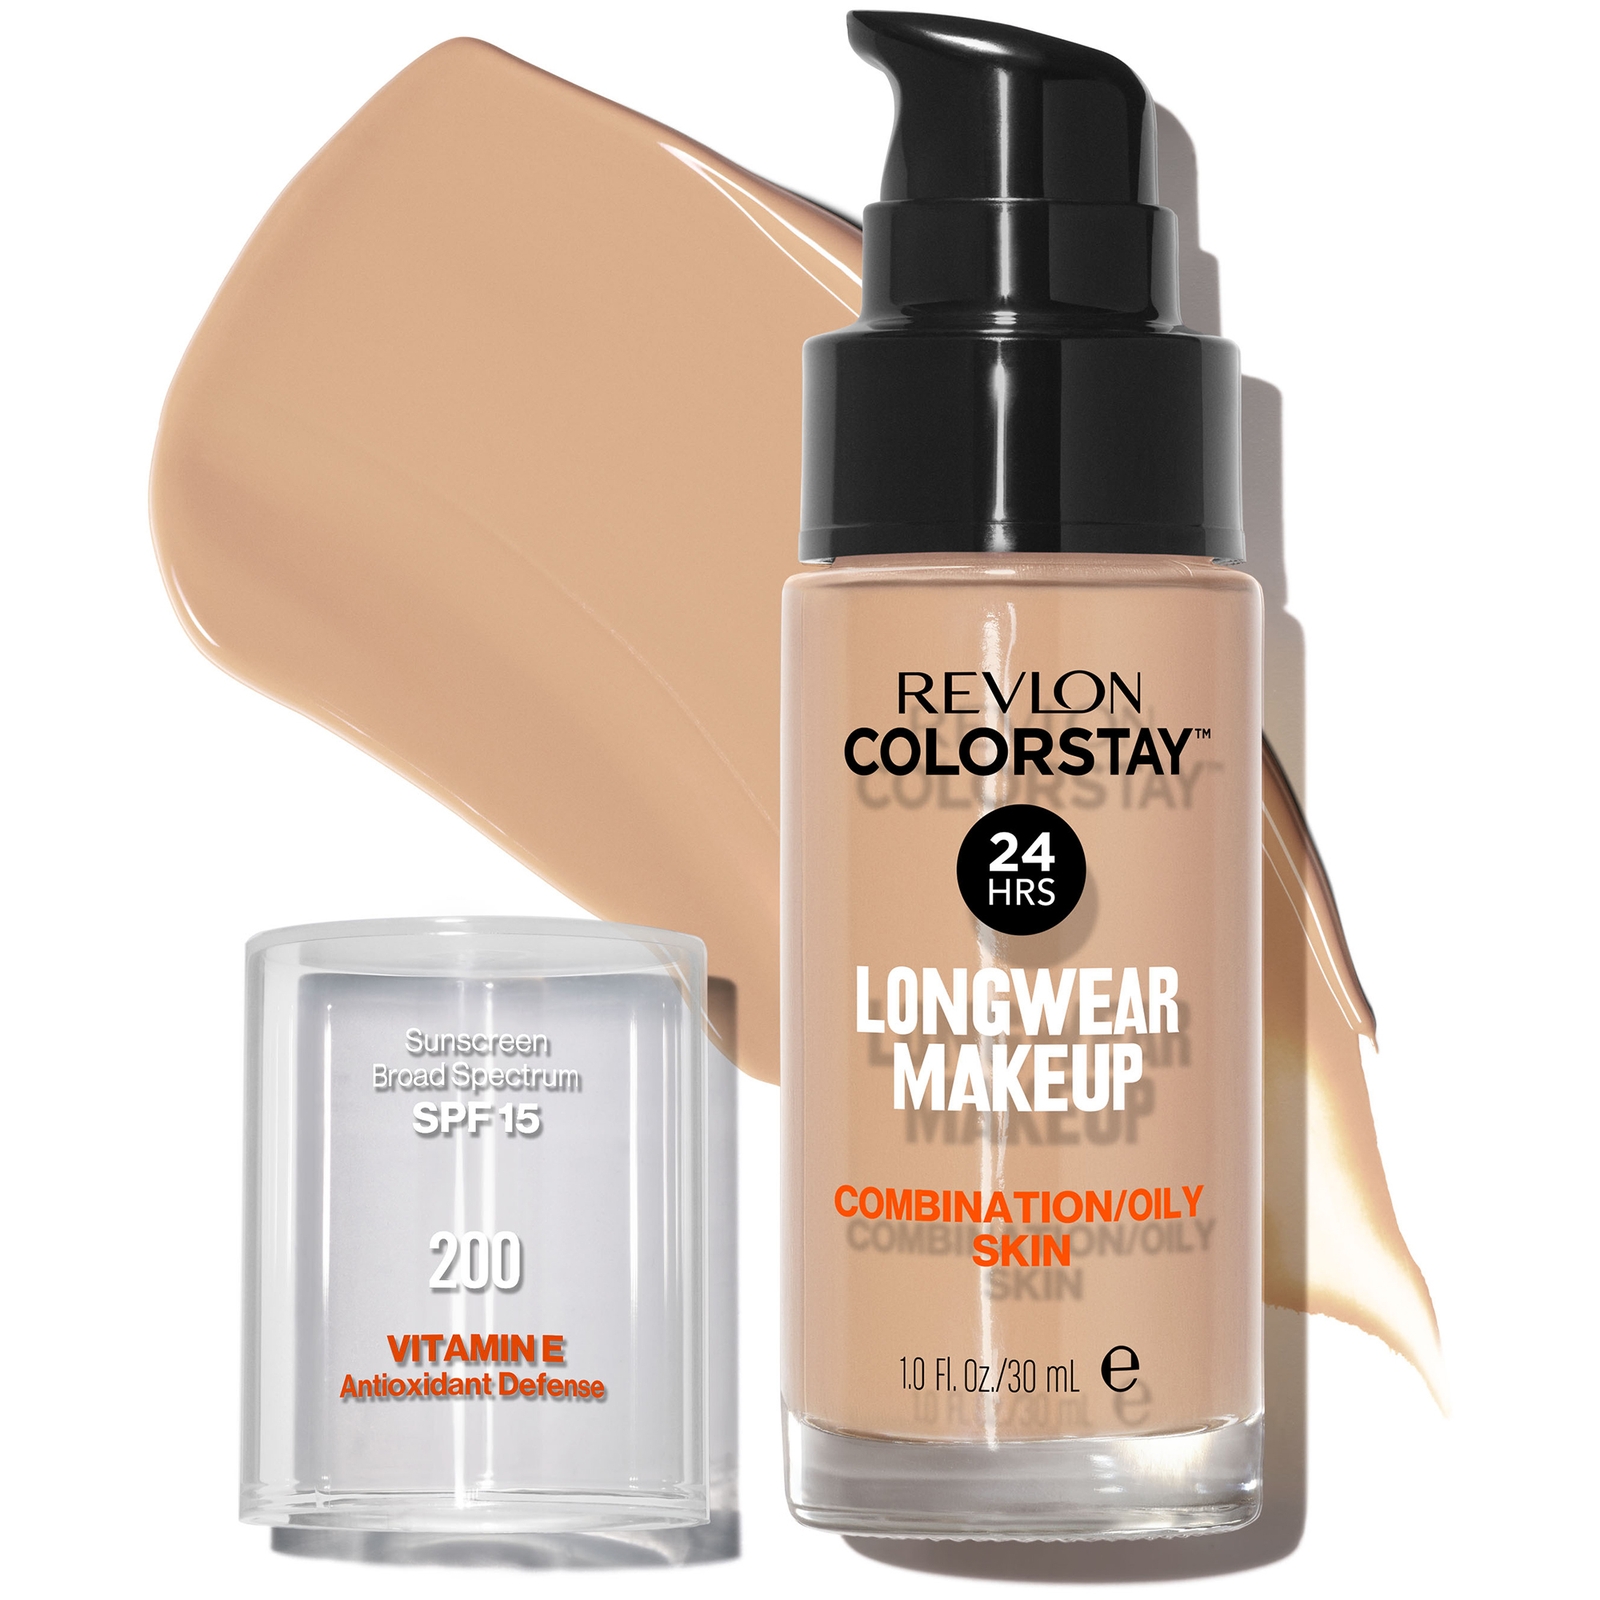 Revlon ColorStay Make-Up Foundation for Combination/Oily Skin (Various Shades) - Nude